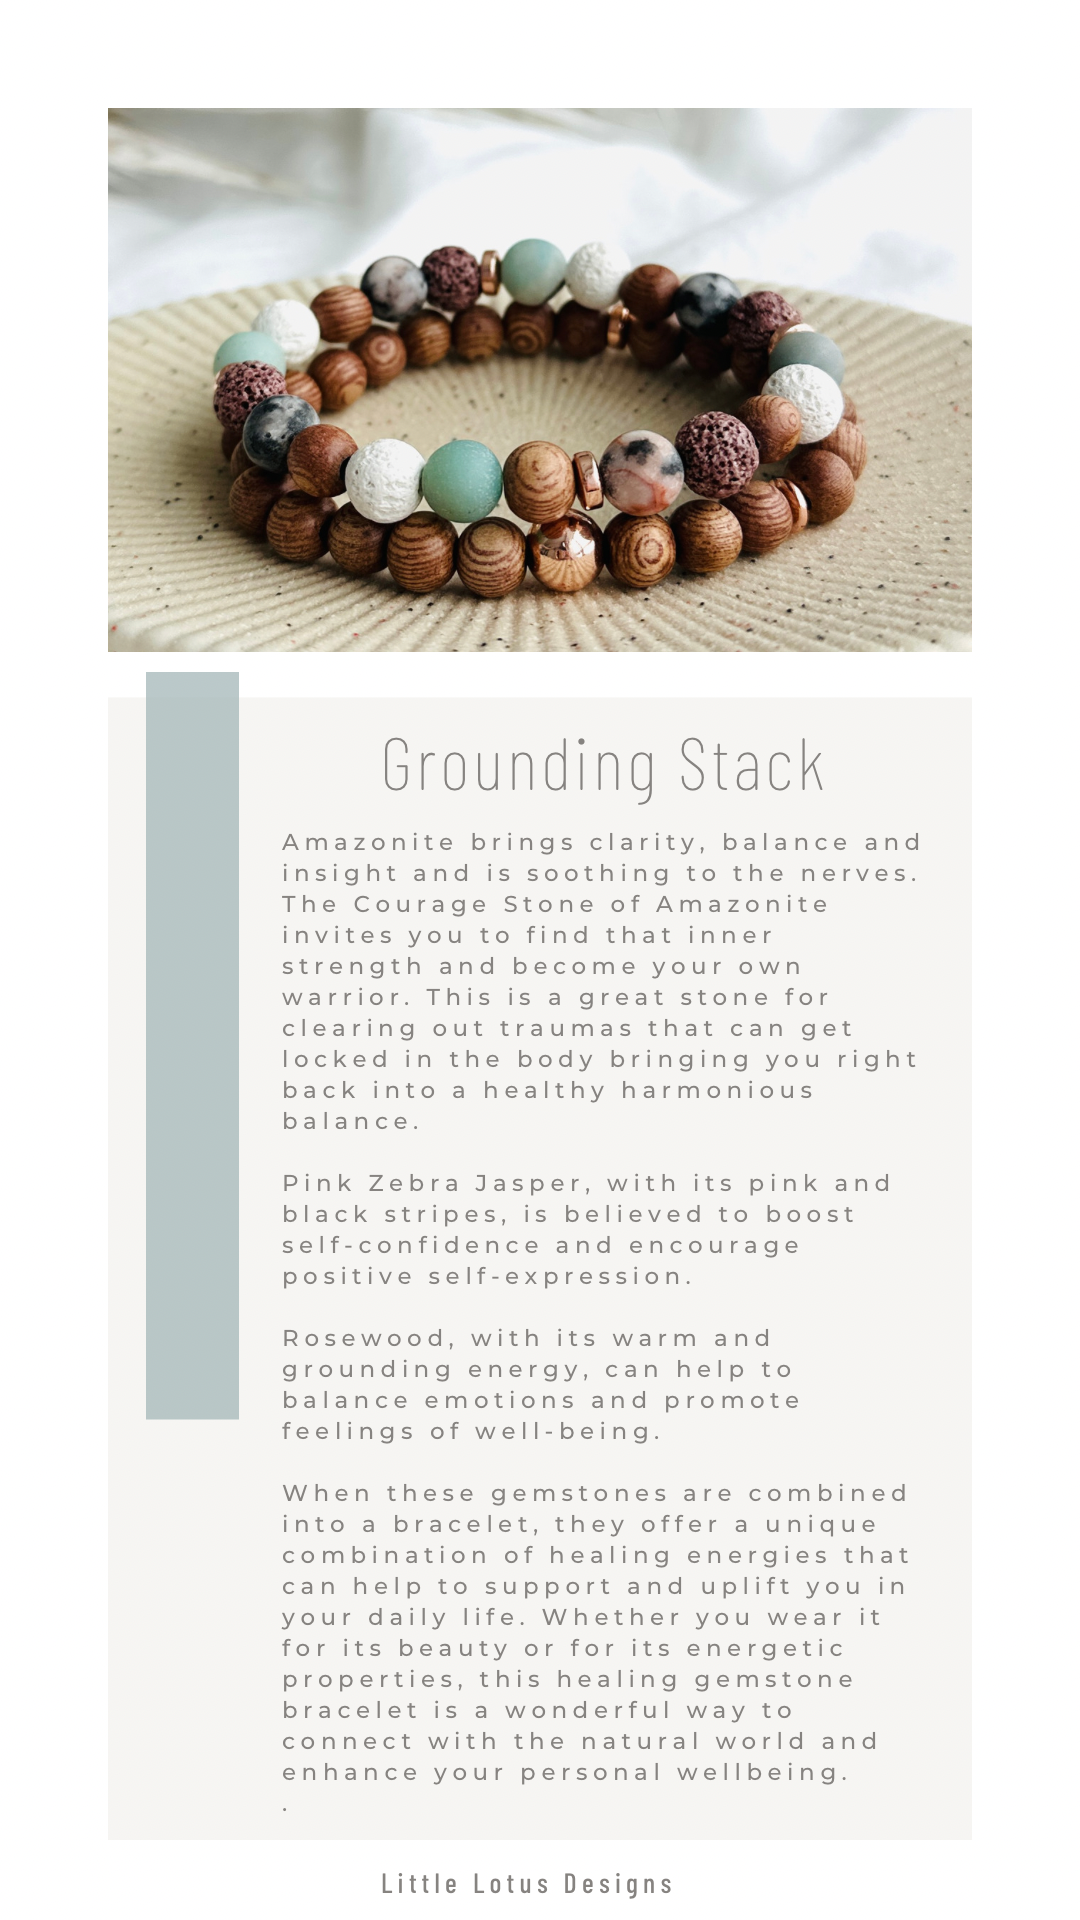 The Grounding Stack.